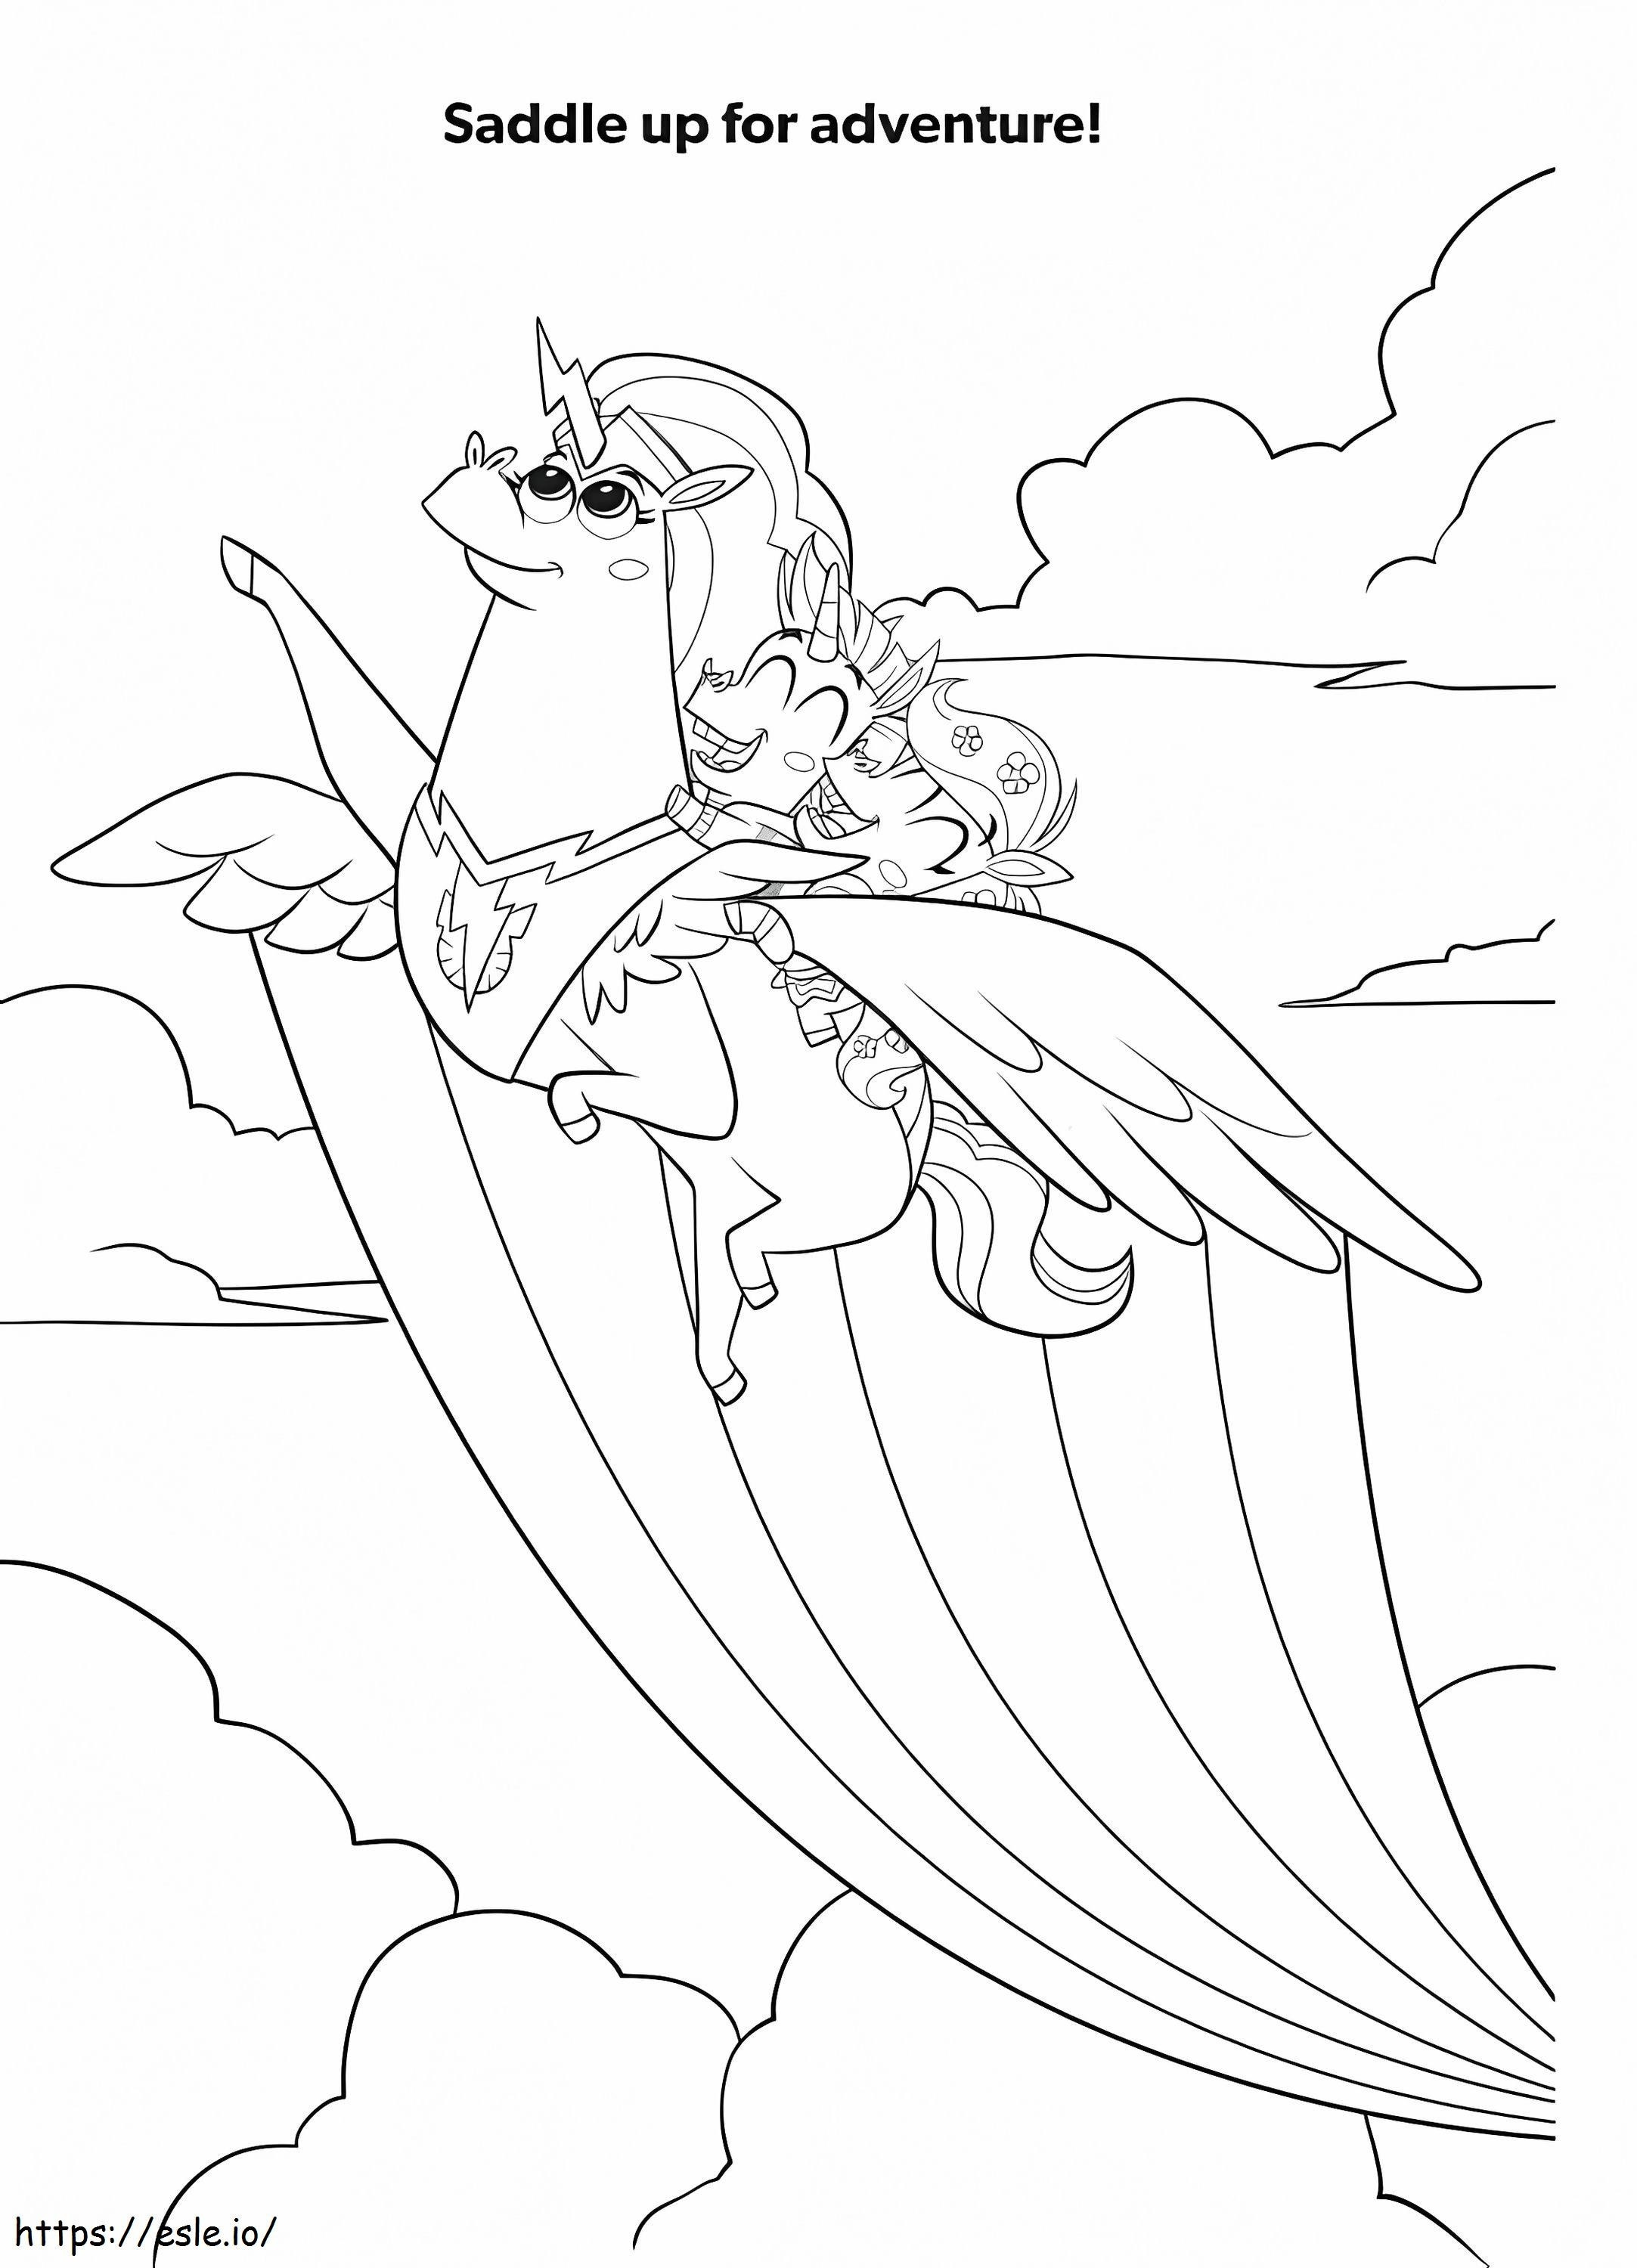 Corn And Peg 8 coloring page